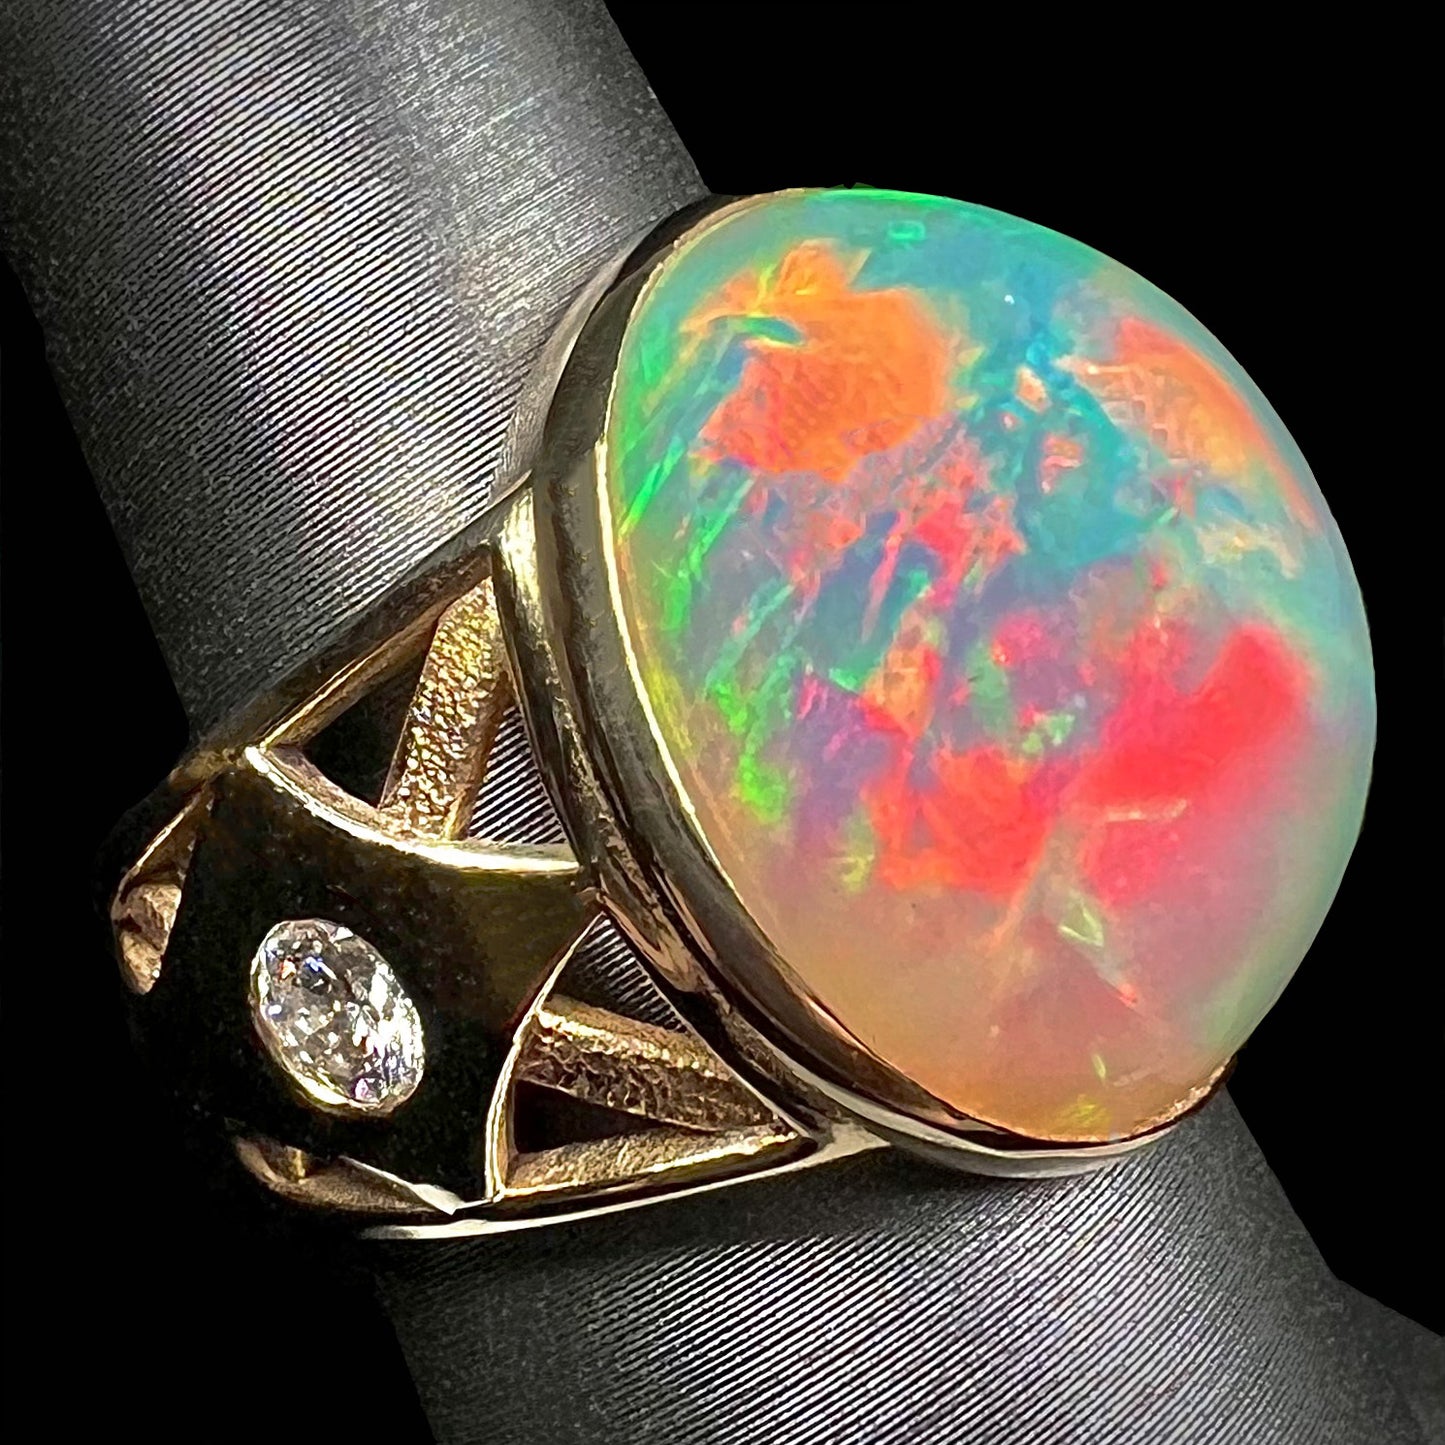 A custom yellow gold men's ring set with two diamonds and a large oval cabochon cut opal from Magdalena, Mexico.